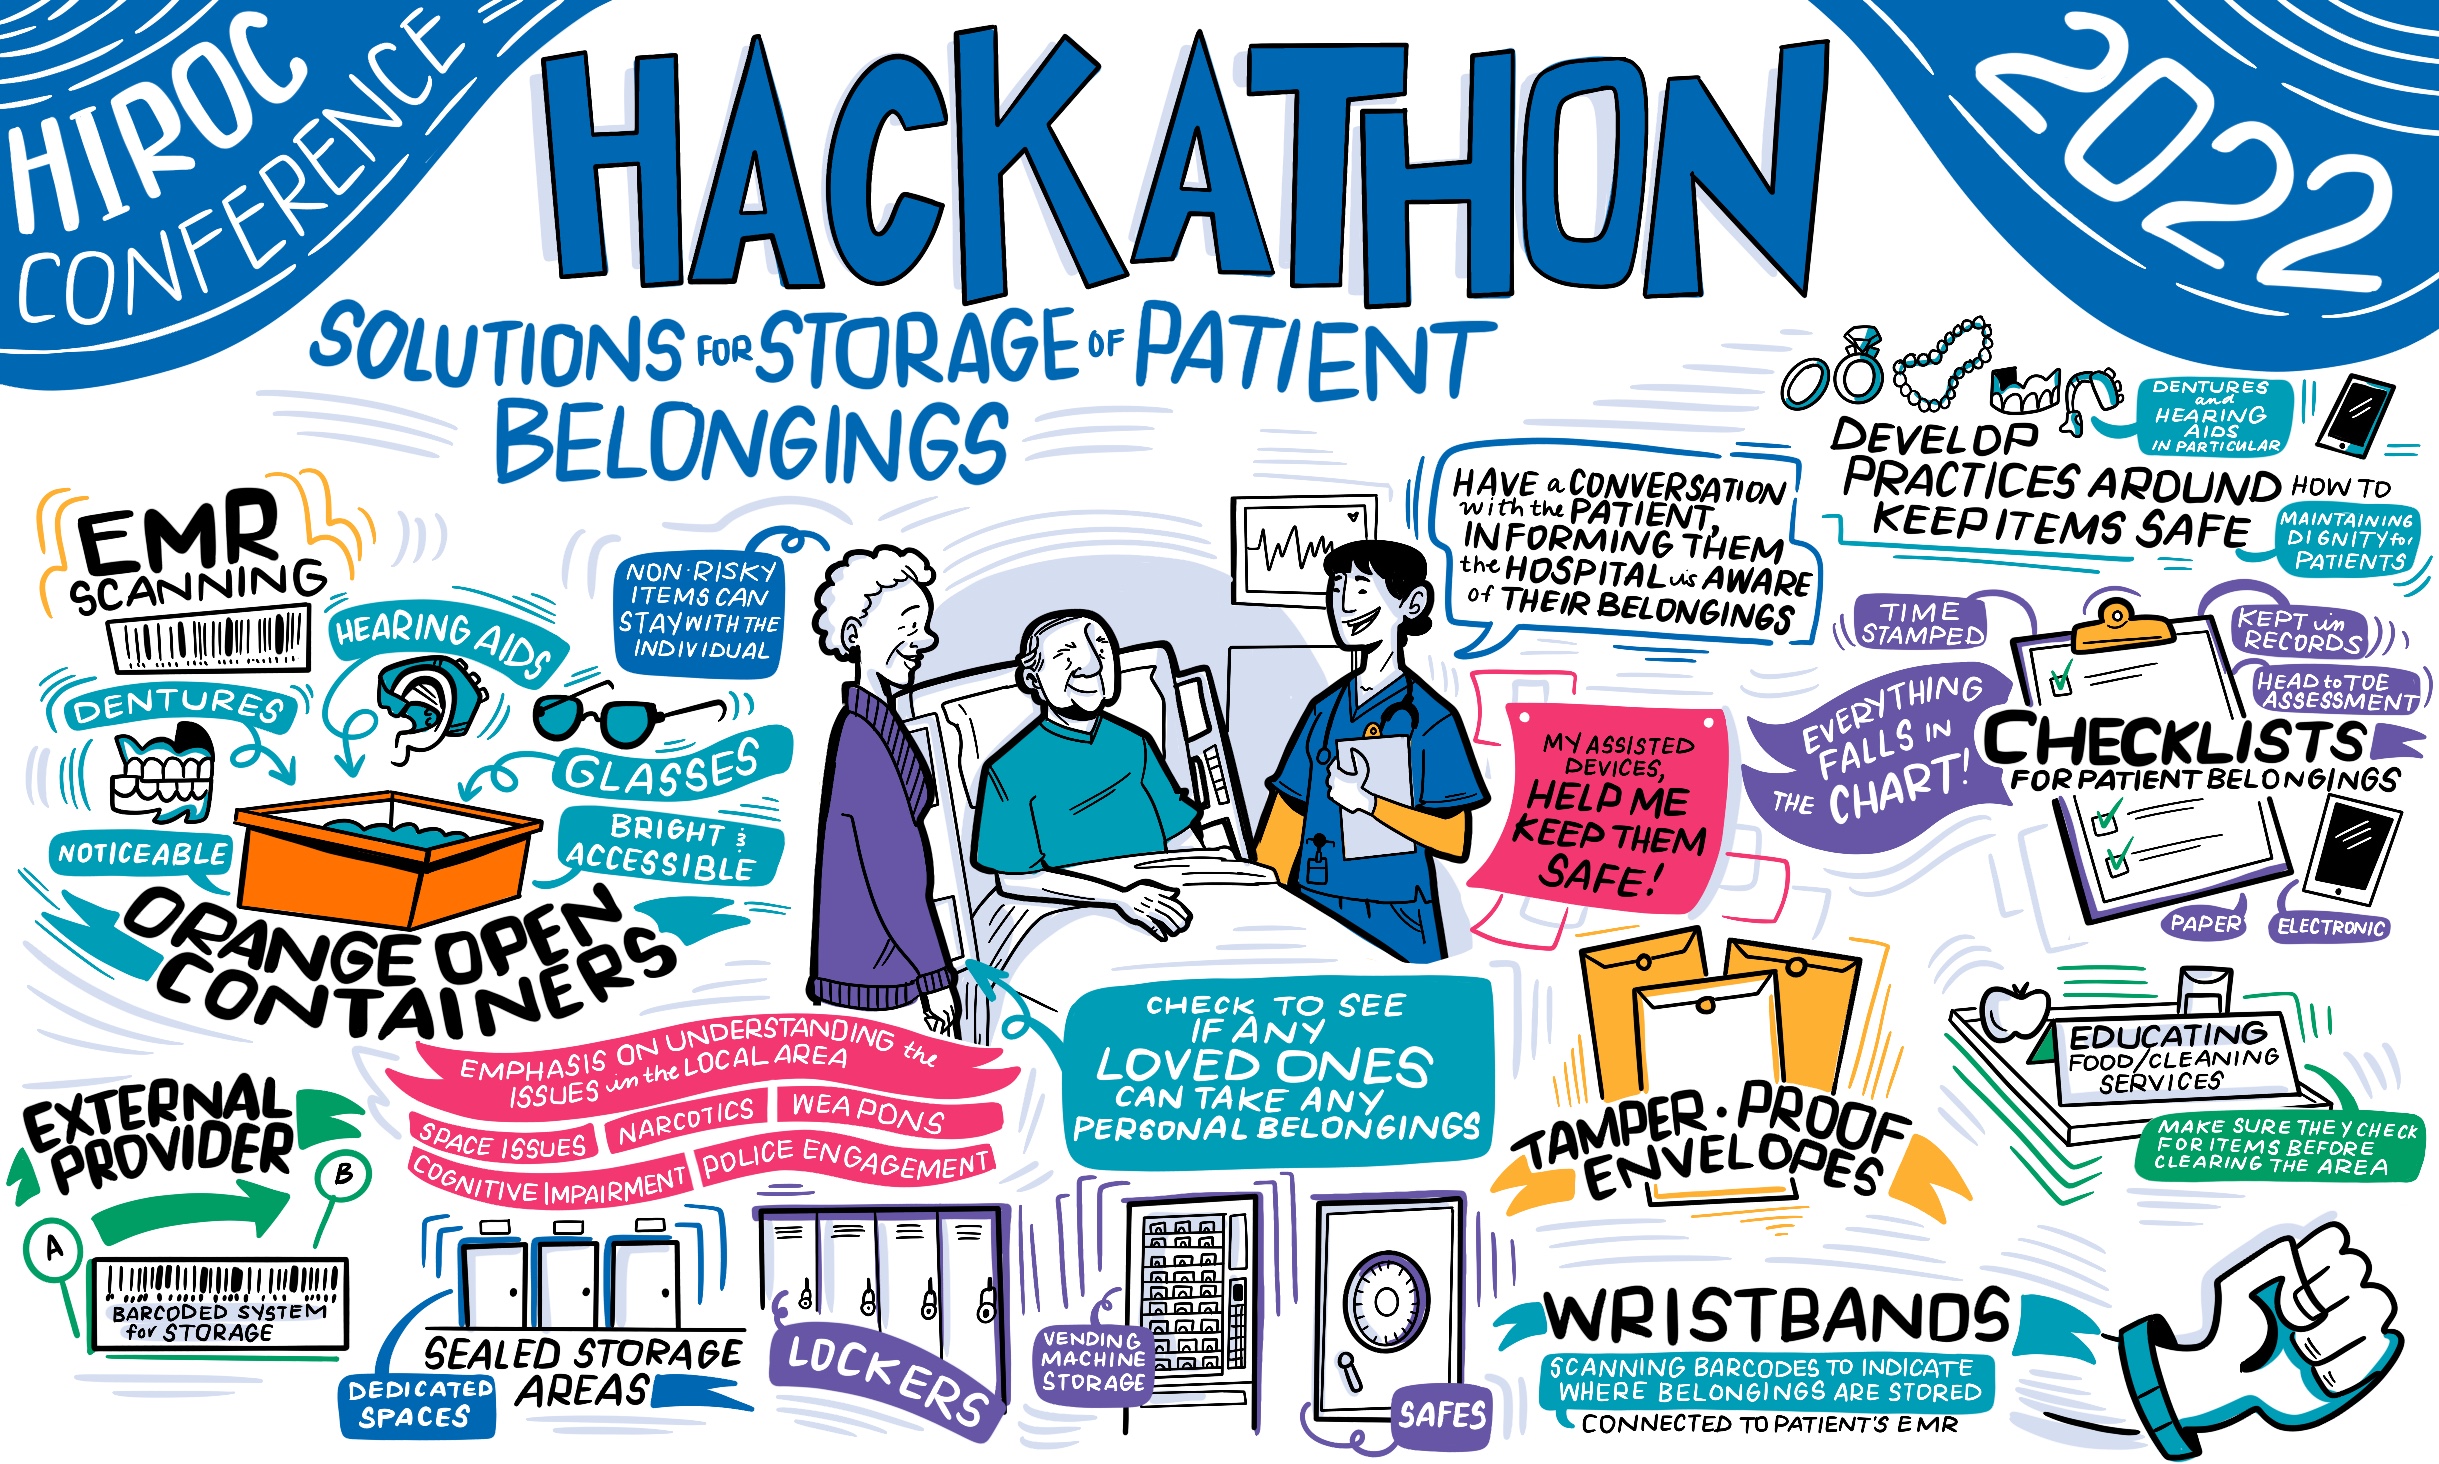 Infographic of hackathon findings (all findings also shared in the text bullets below the image).